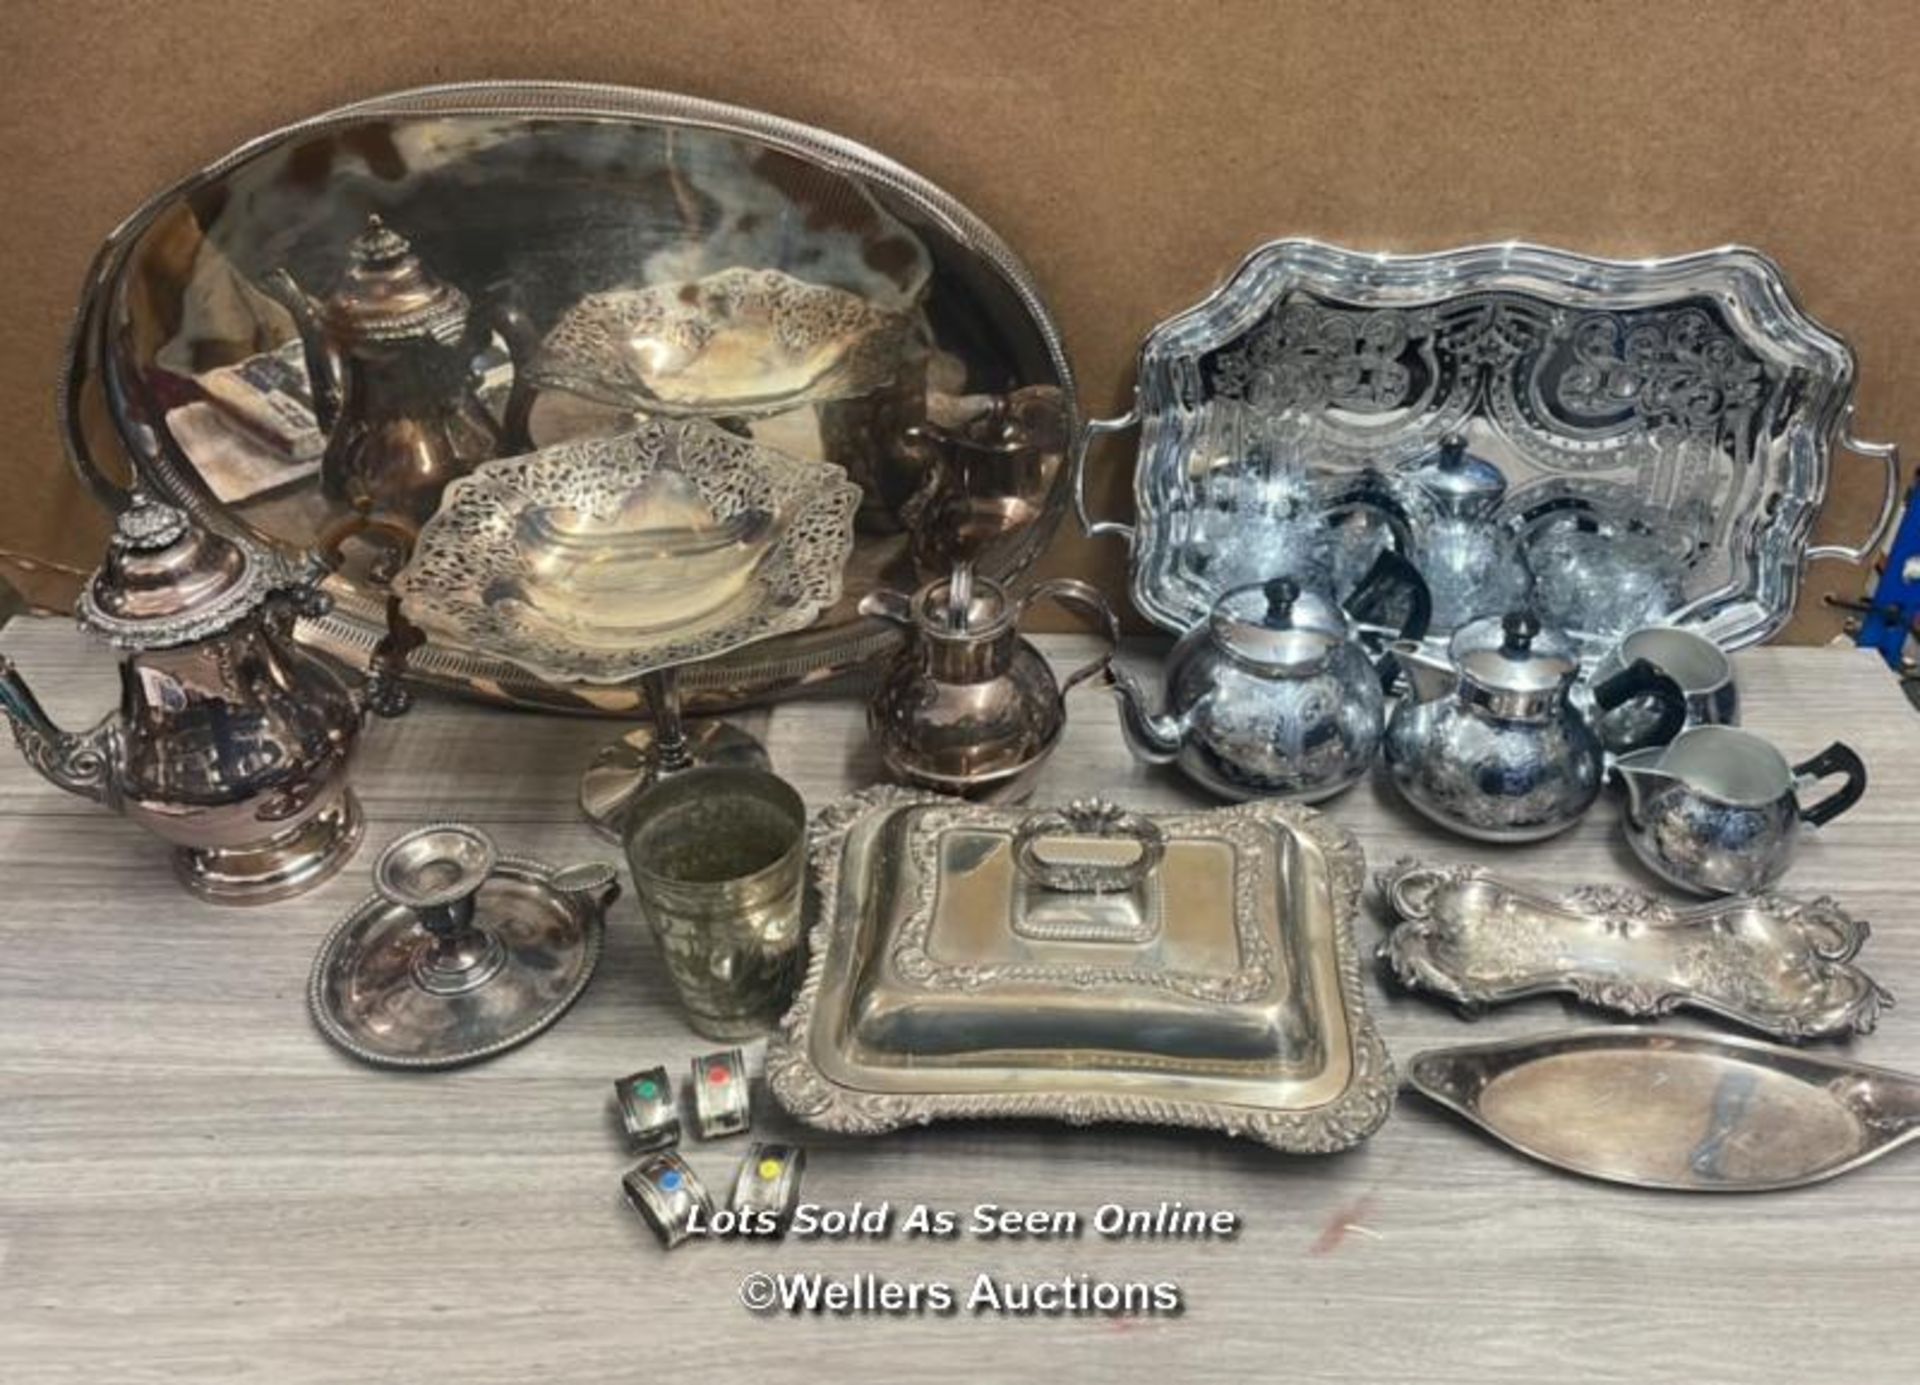 A LARGE QUANTITY OF ANTIQUE METAL WARE INCLUDING TRAYS, LARGE SERVING DISH, COFFE & TEA POTS AND